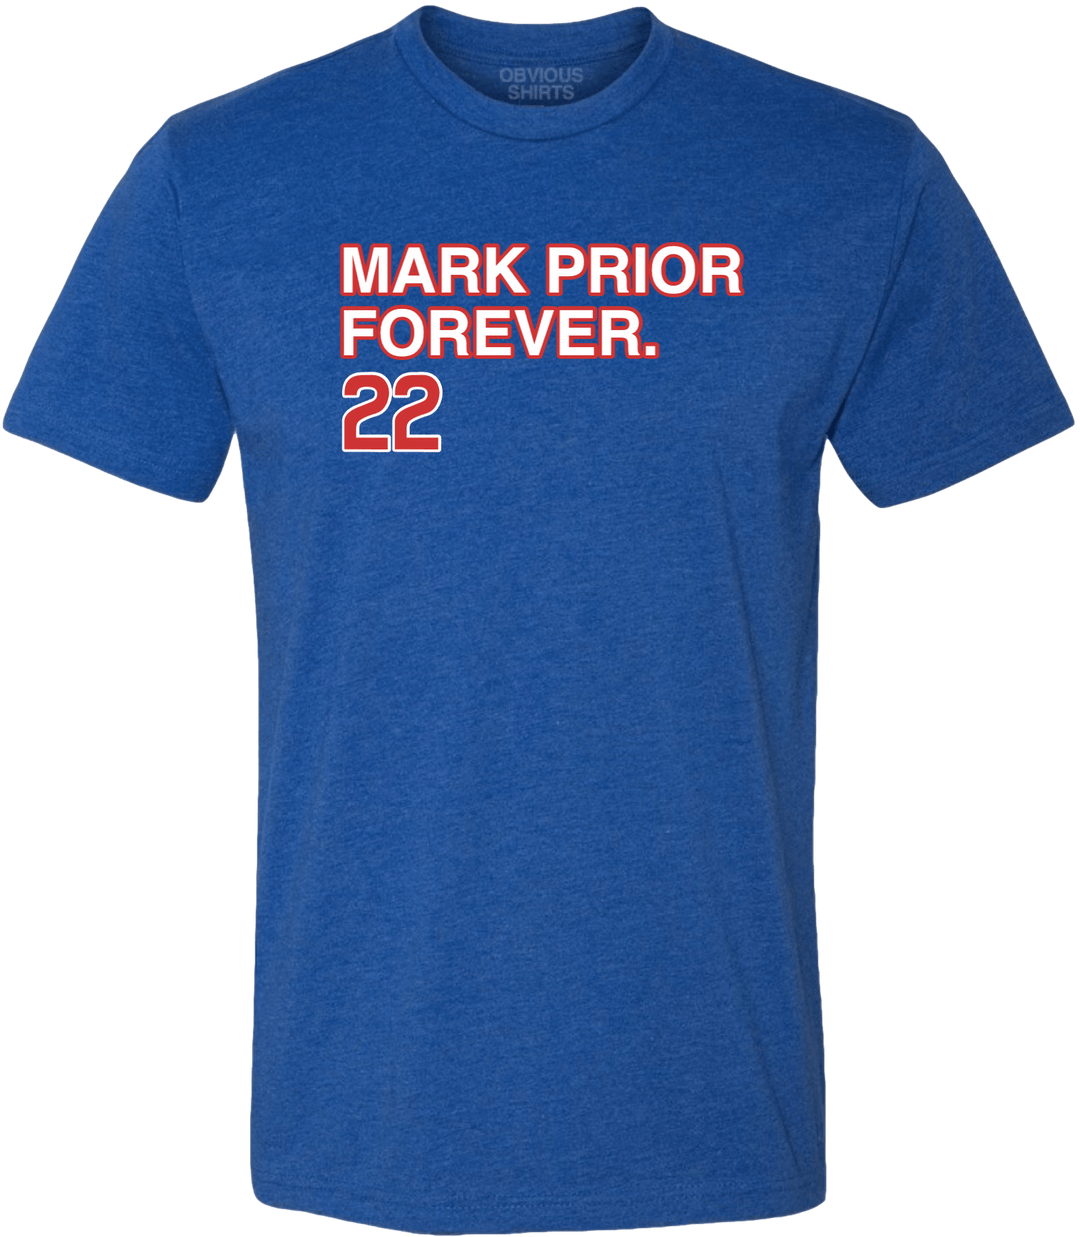 MARK PRIOR FOREVER 22. - OBVIOUS SHIRTS.